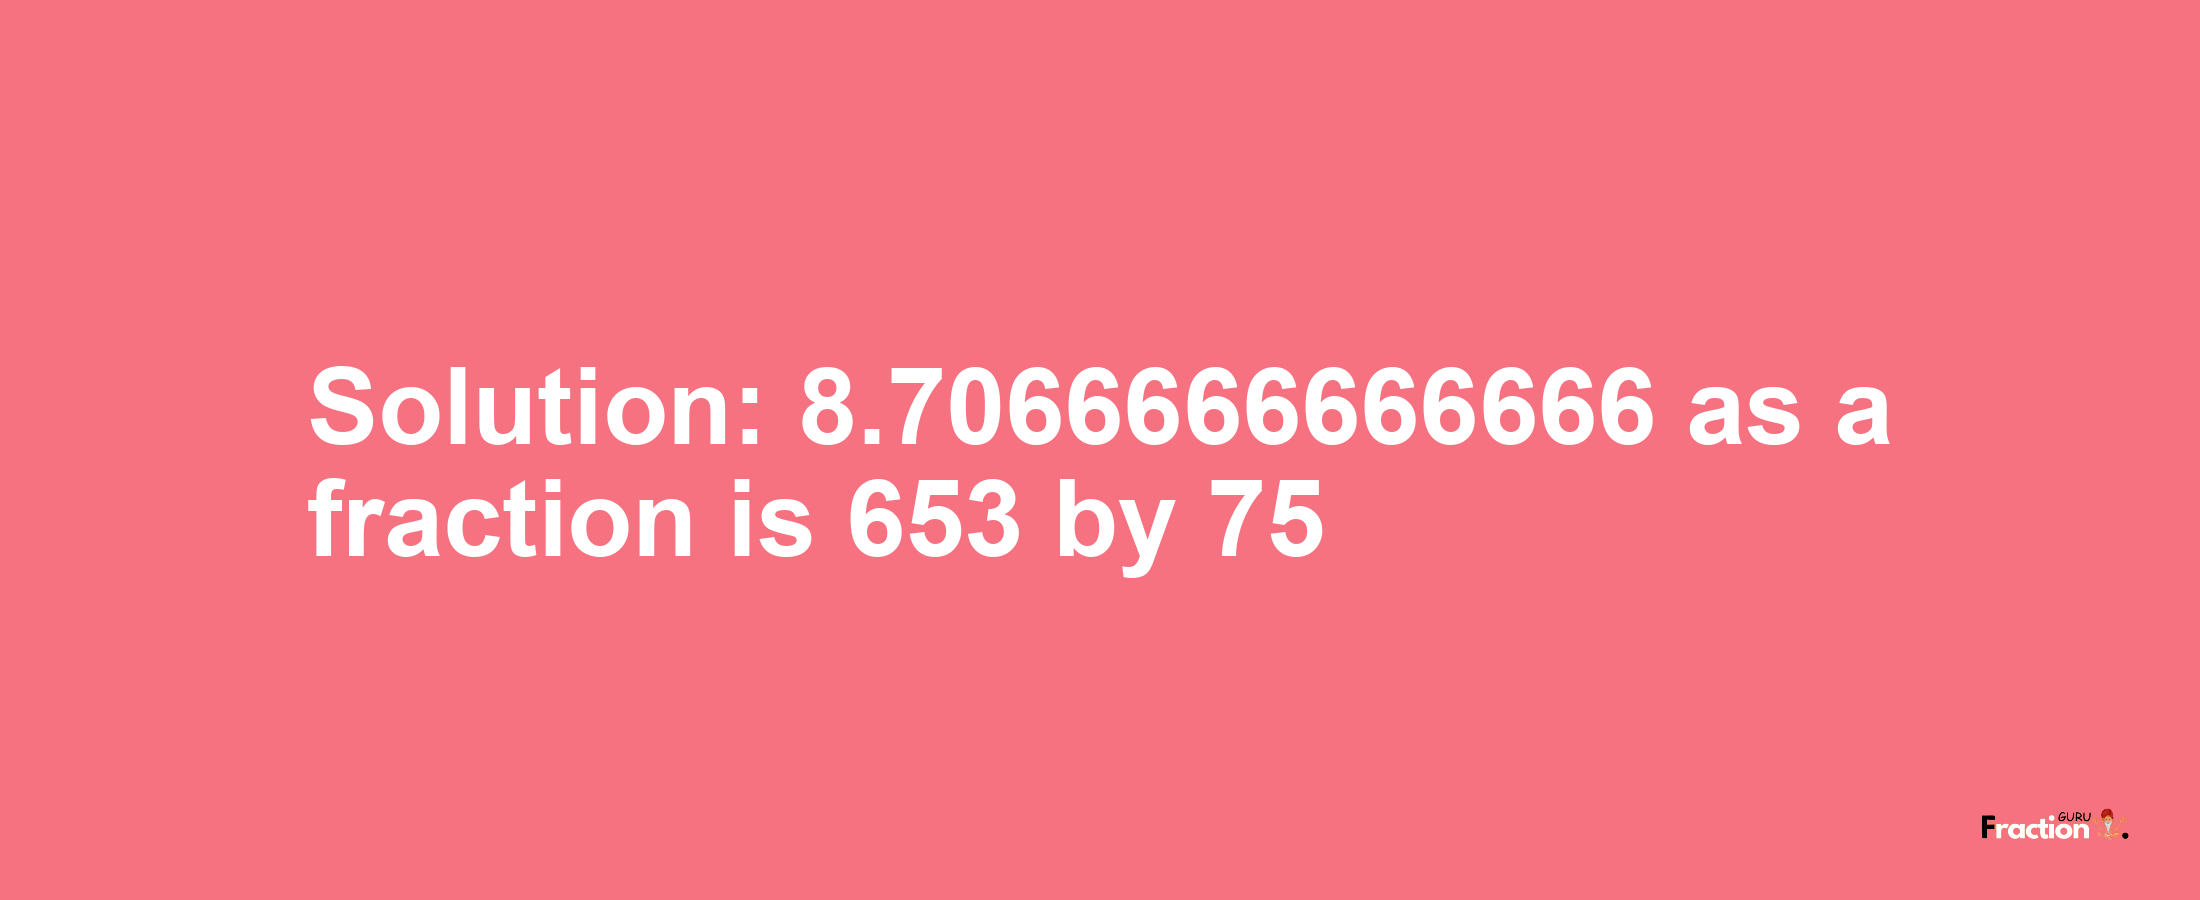 Solution:8.7066666666666 as a fraction is 653/75